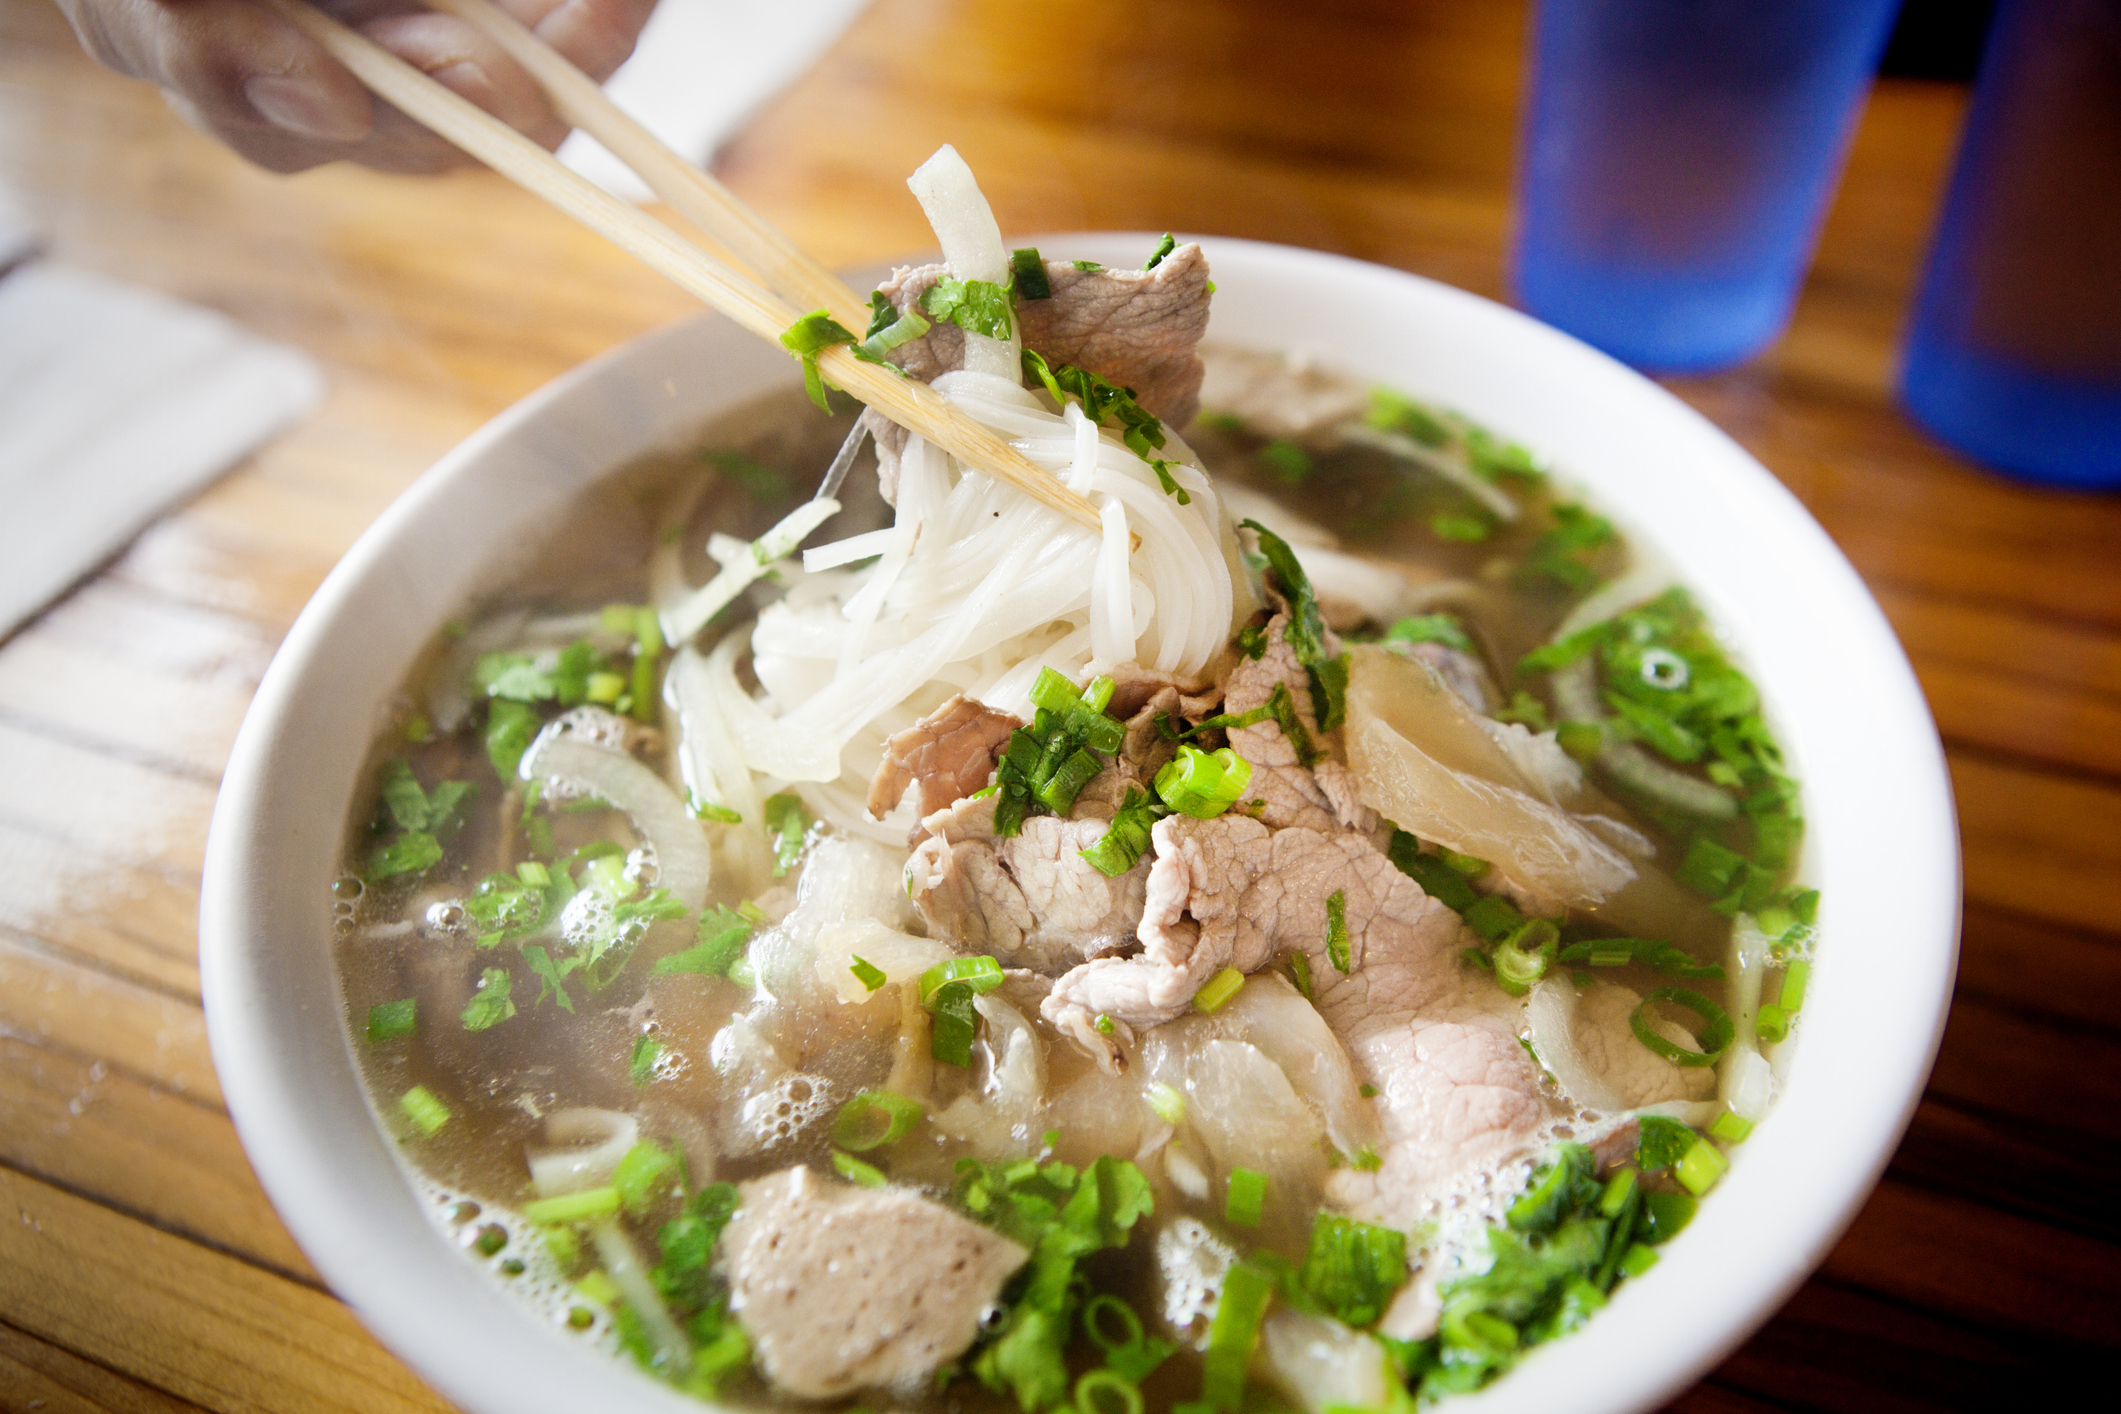 A bowl of pho with chopsticks lifting noodles and slices of beef, garnished with green onions